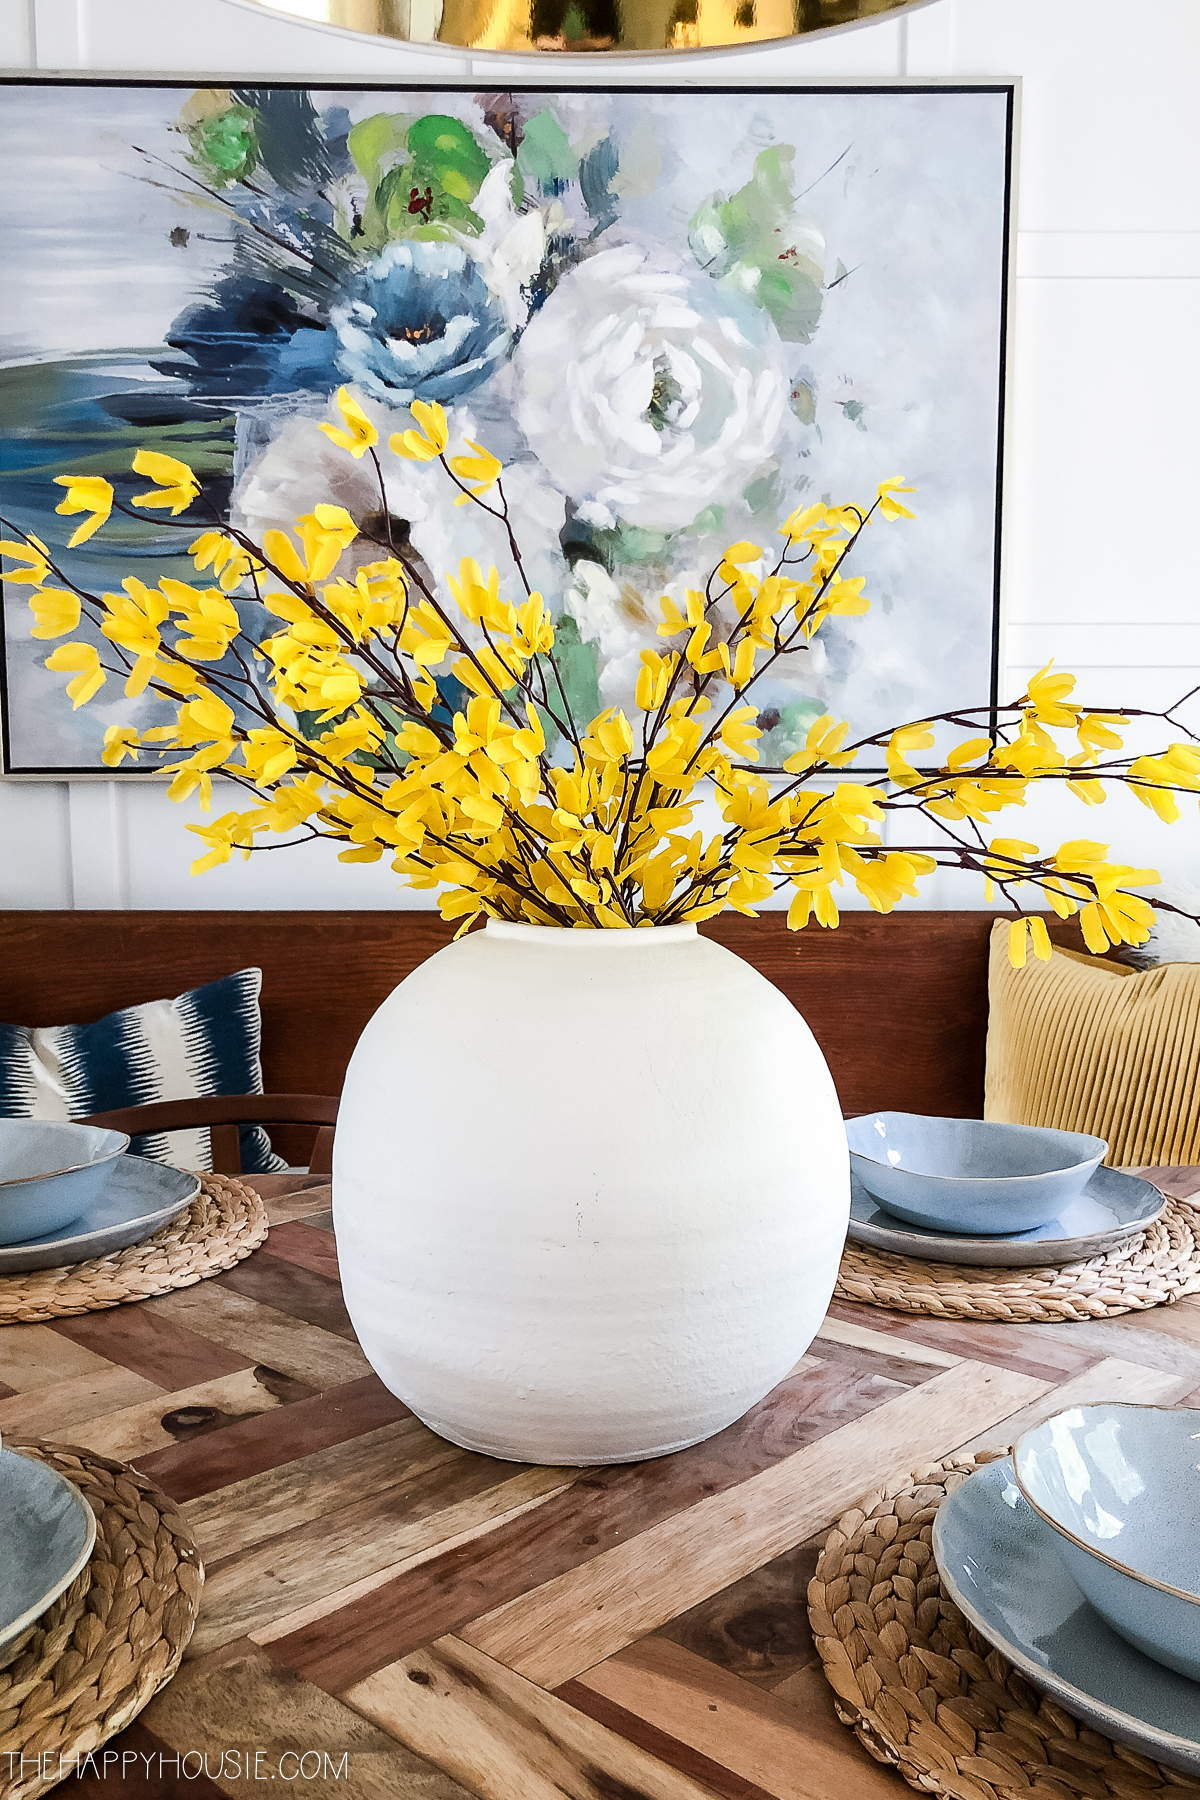 The bold yellow blooms in the white vase as a centerpiece on the table.